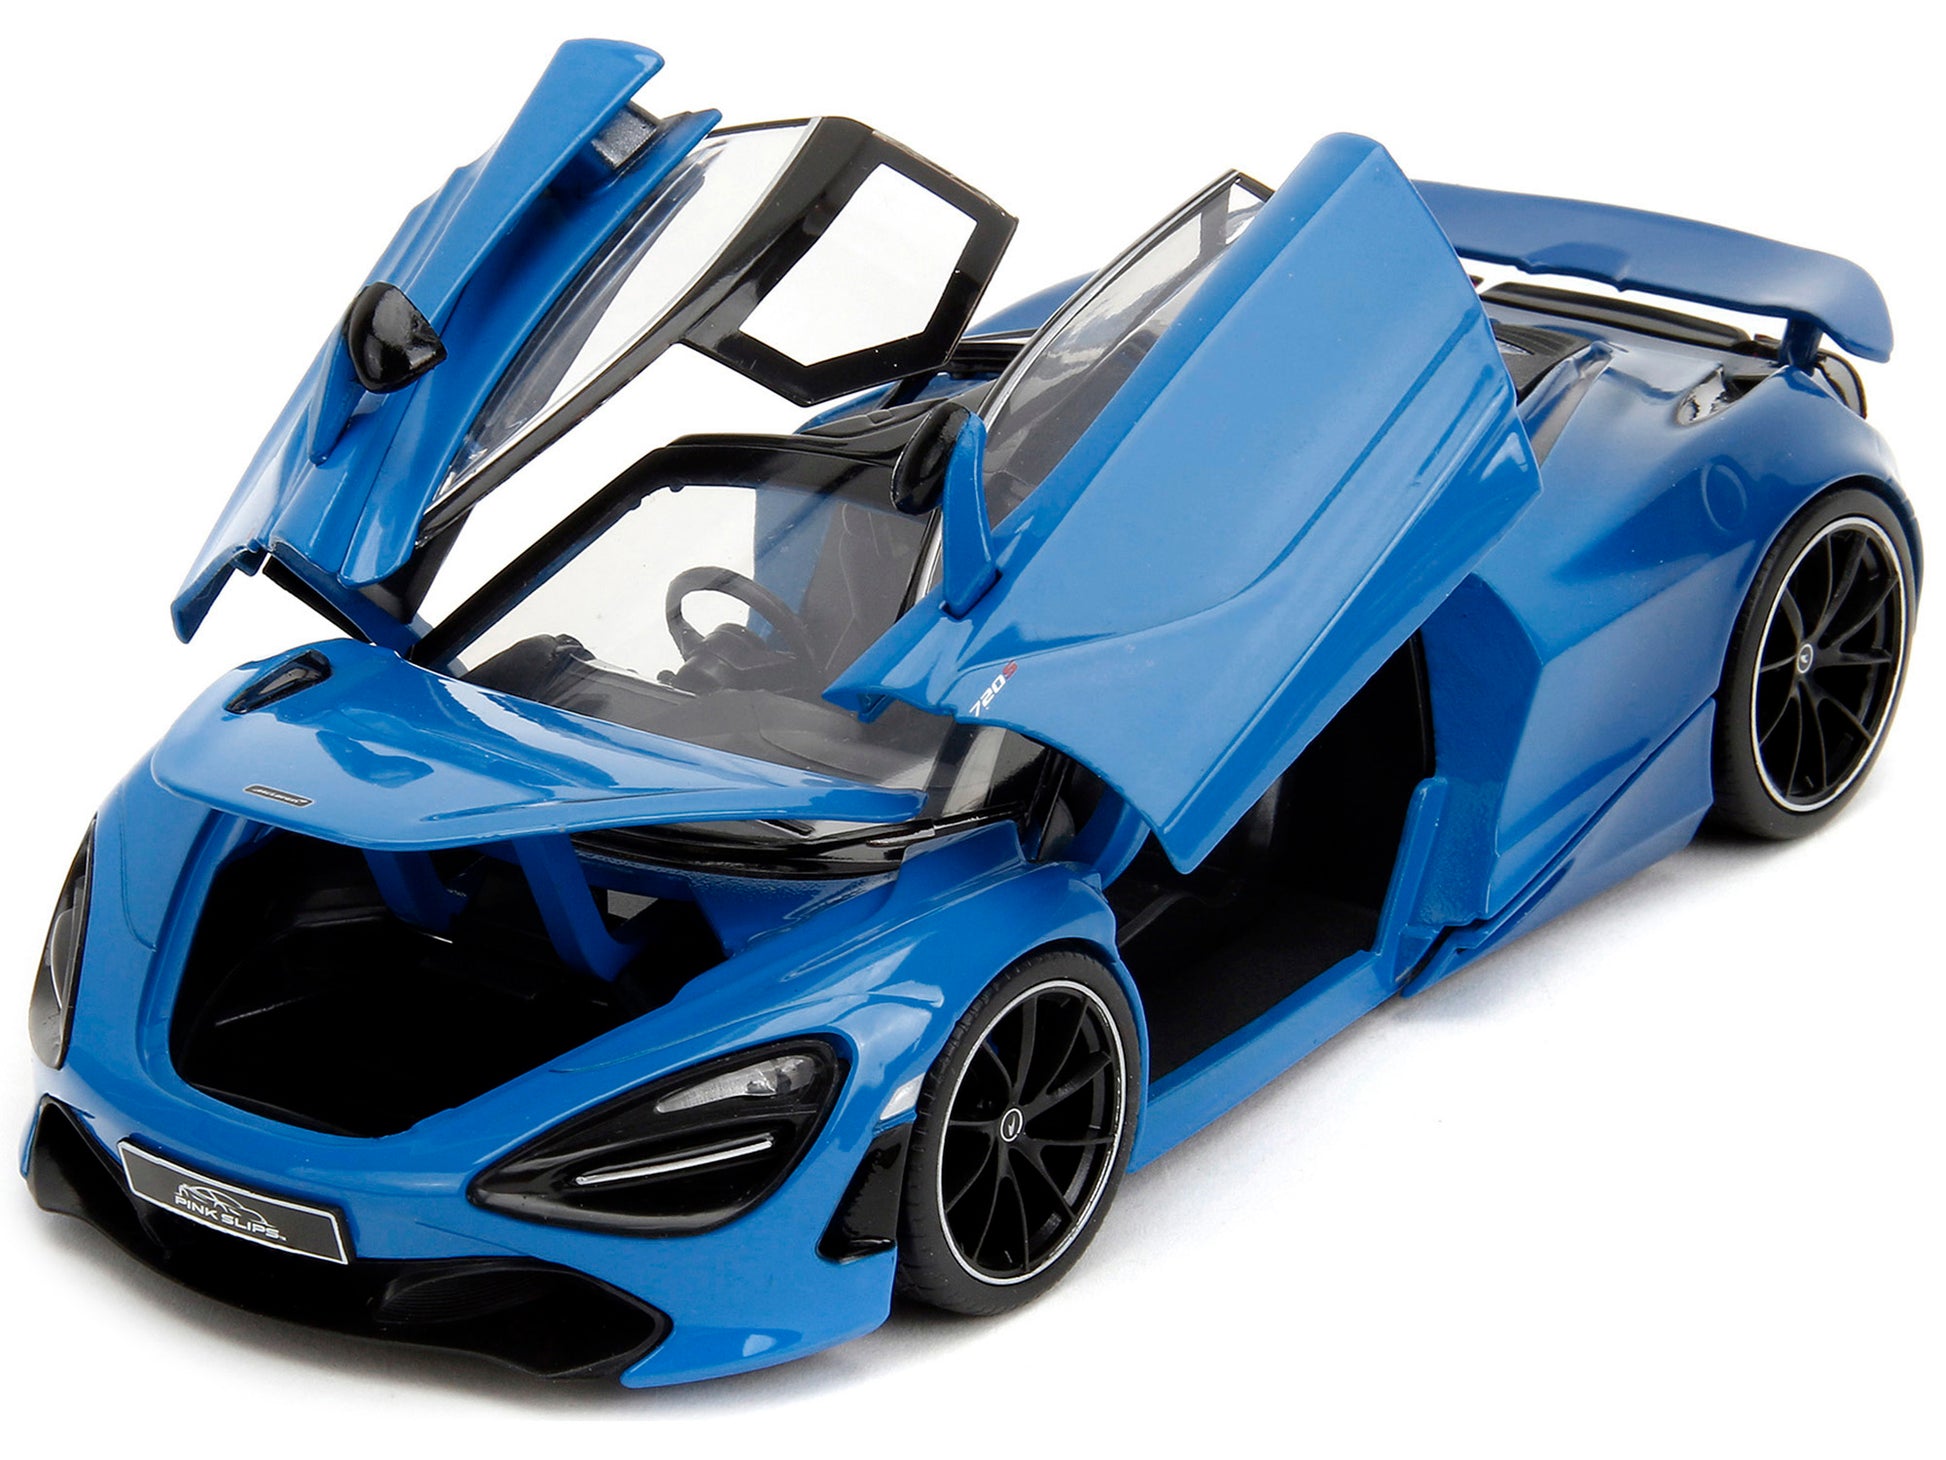 mclaren 720s and with top slips series 1/24 diecast model car